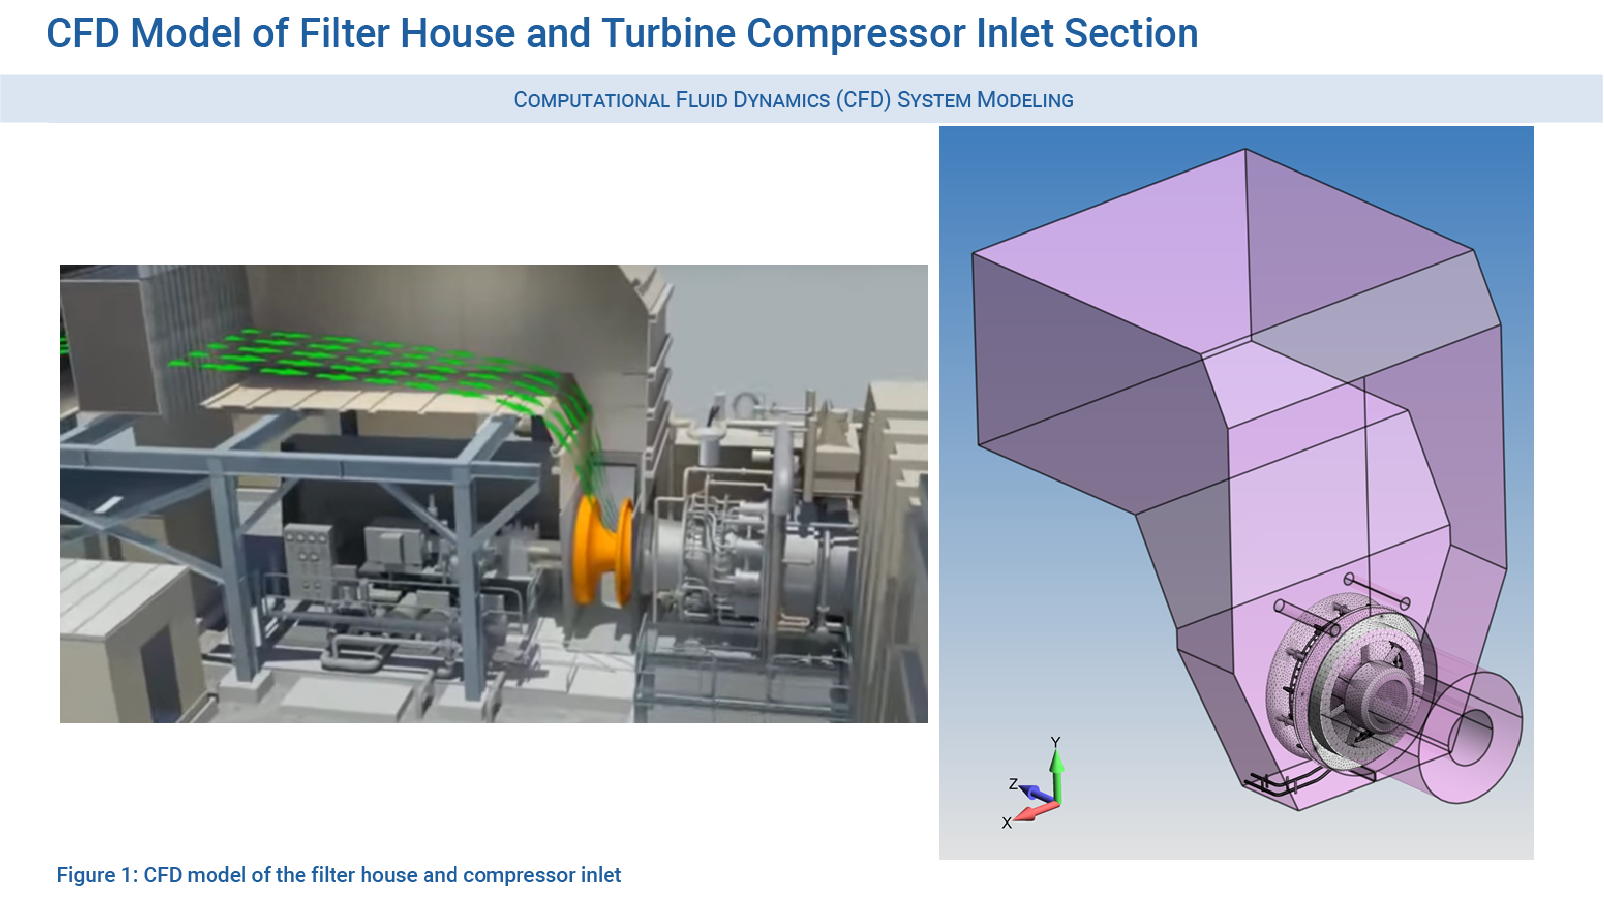 CFD Model of Filter House and Turbine Compressor Inlet Section - Courtesy of Predictive Engineering CFD Consulting Services